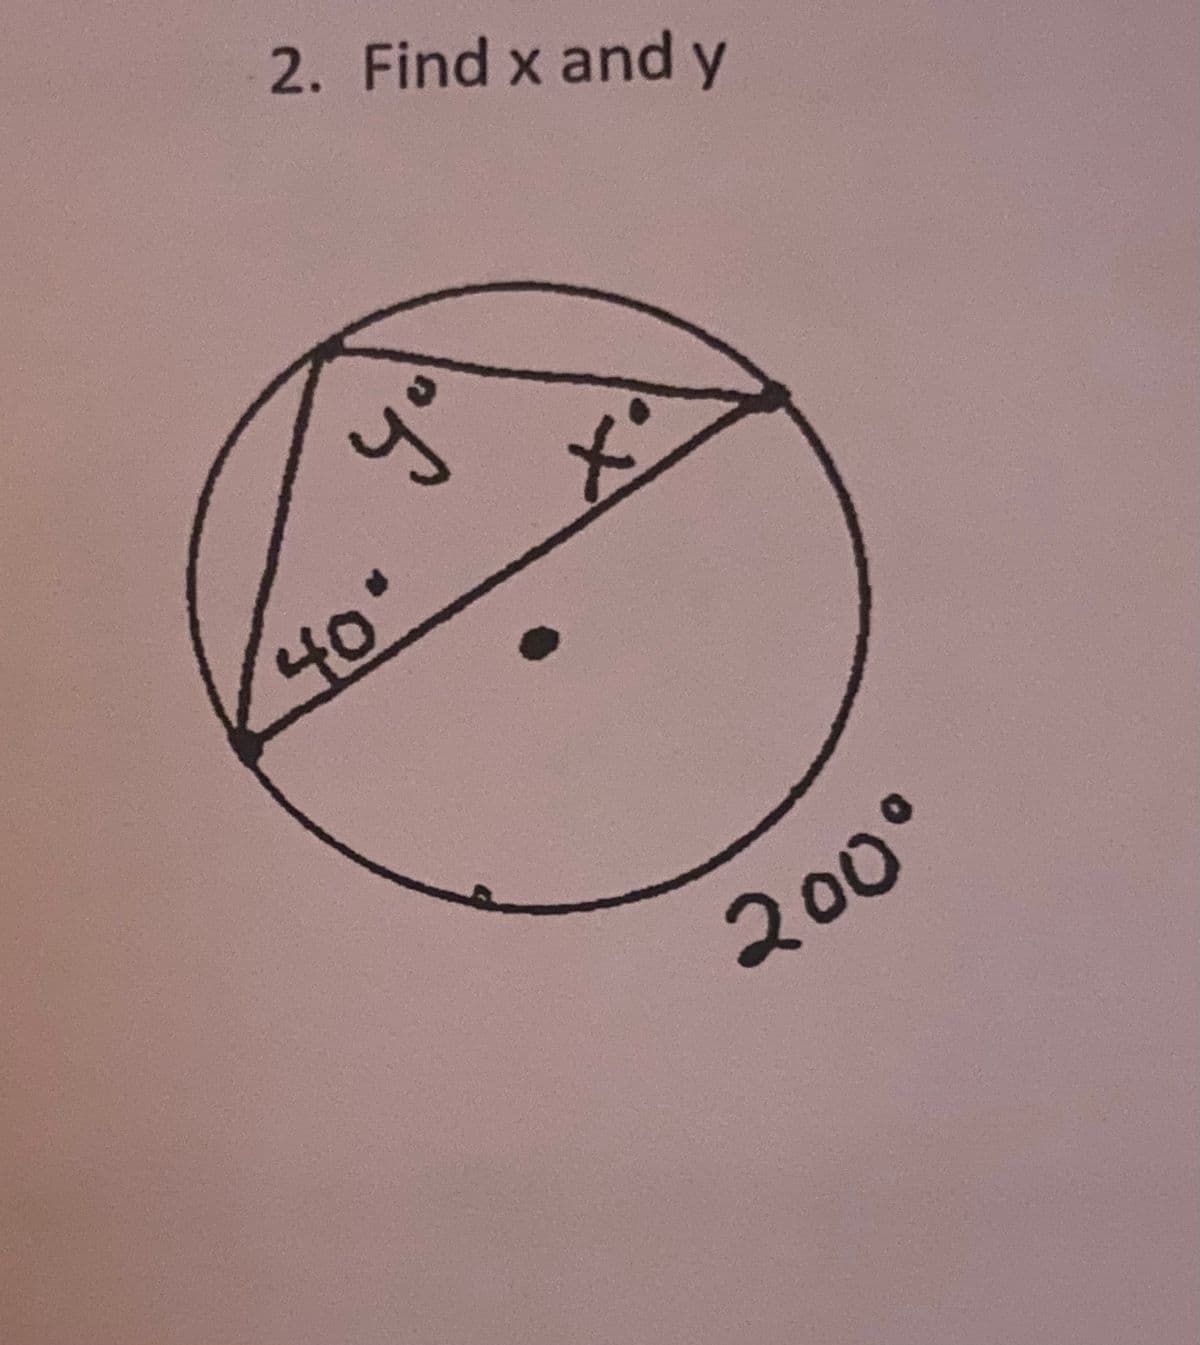 2. Find x and y
40°
200°
